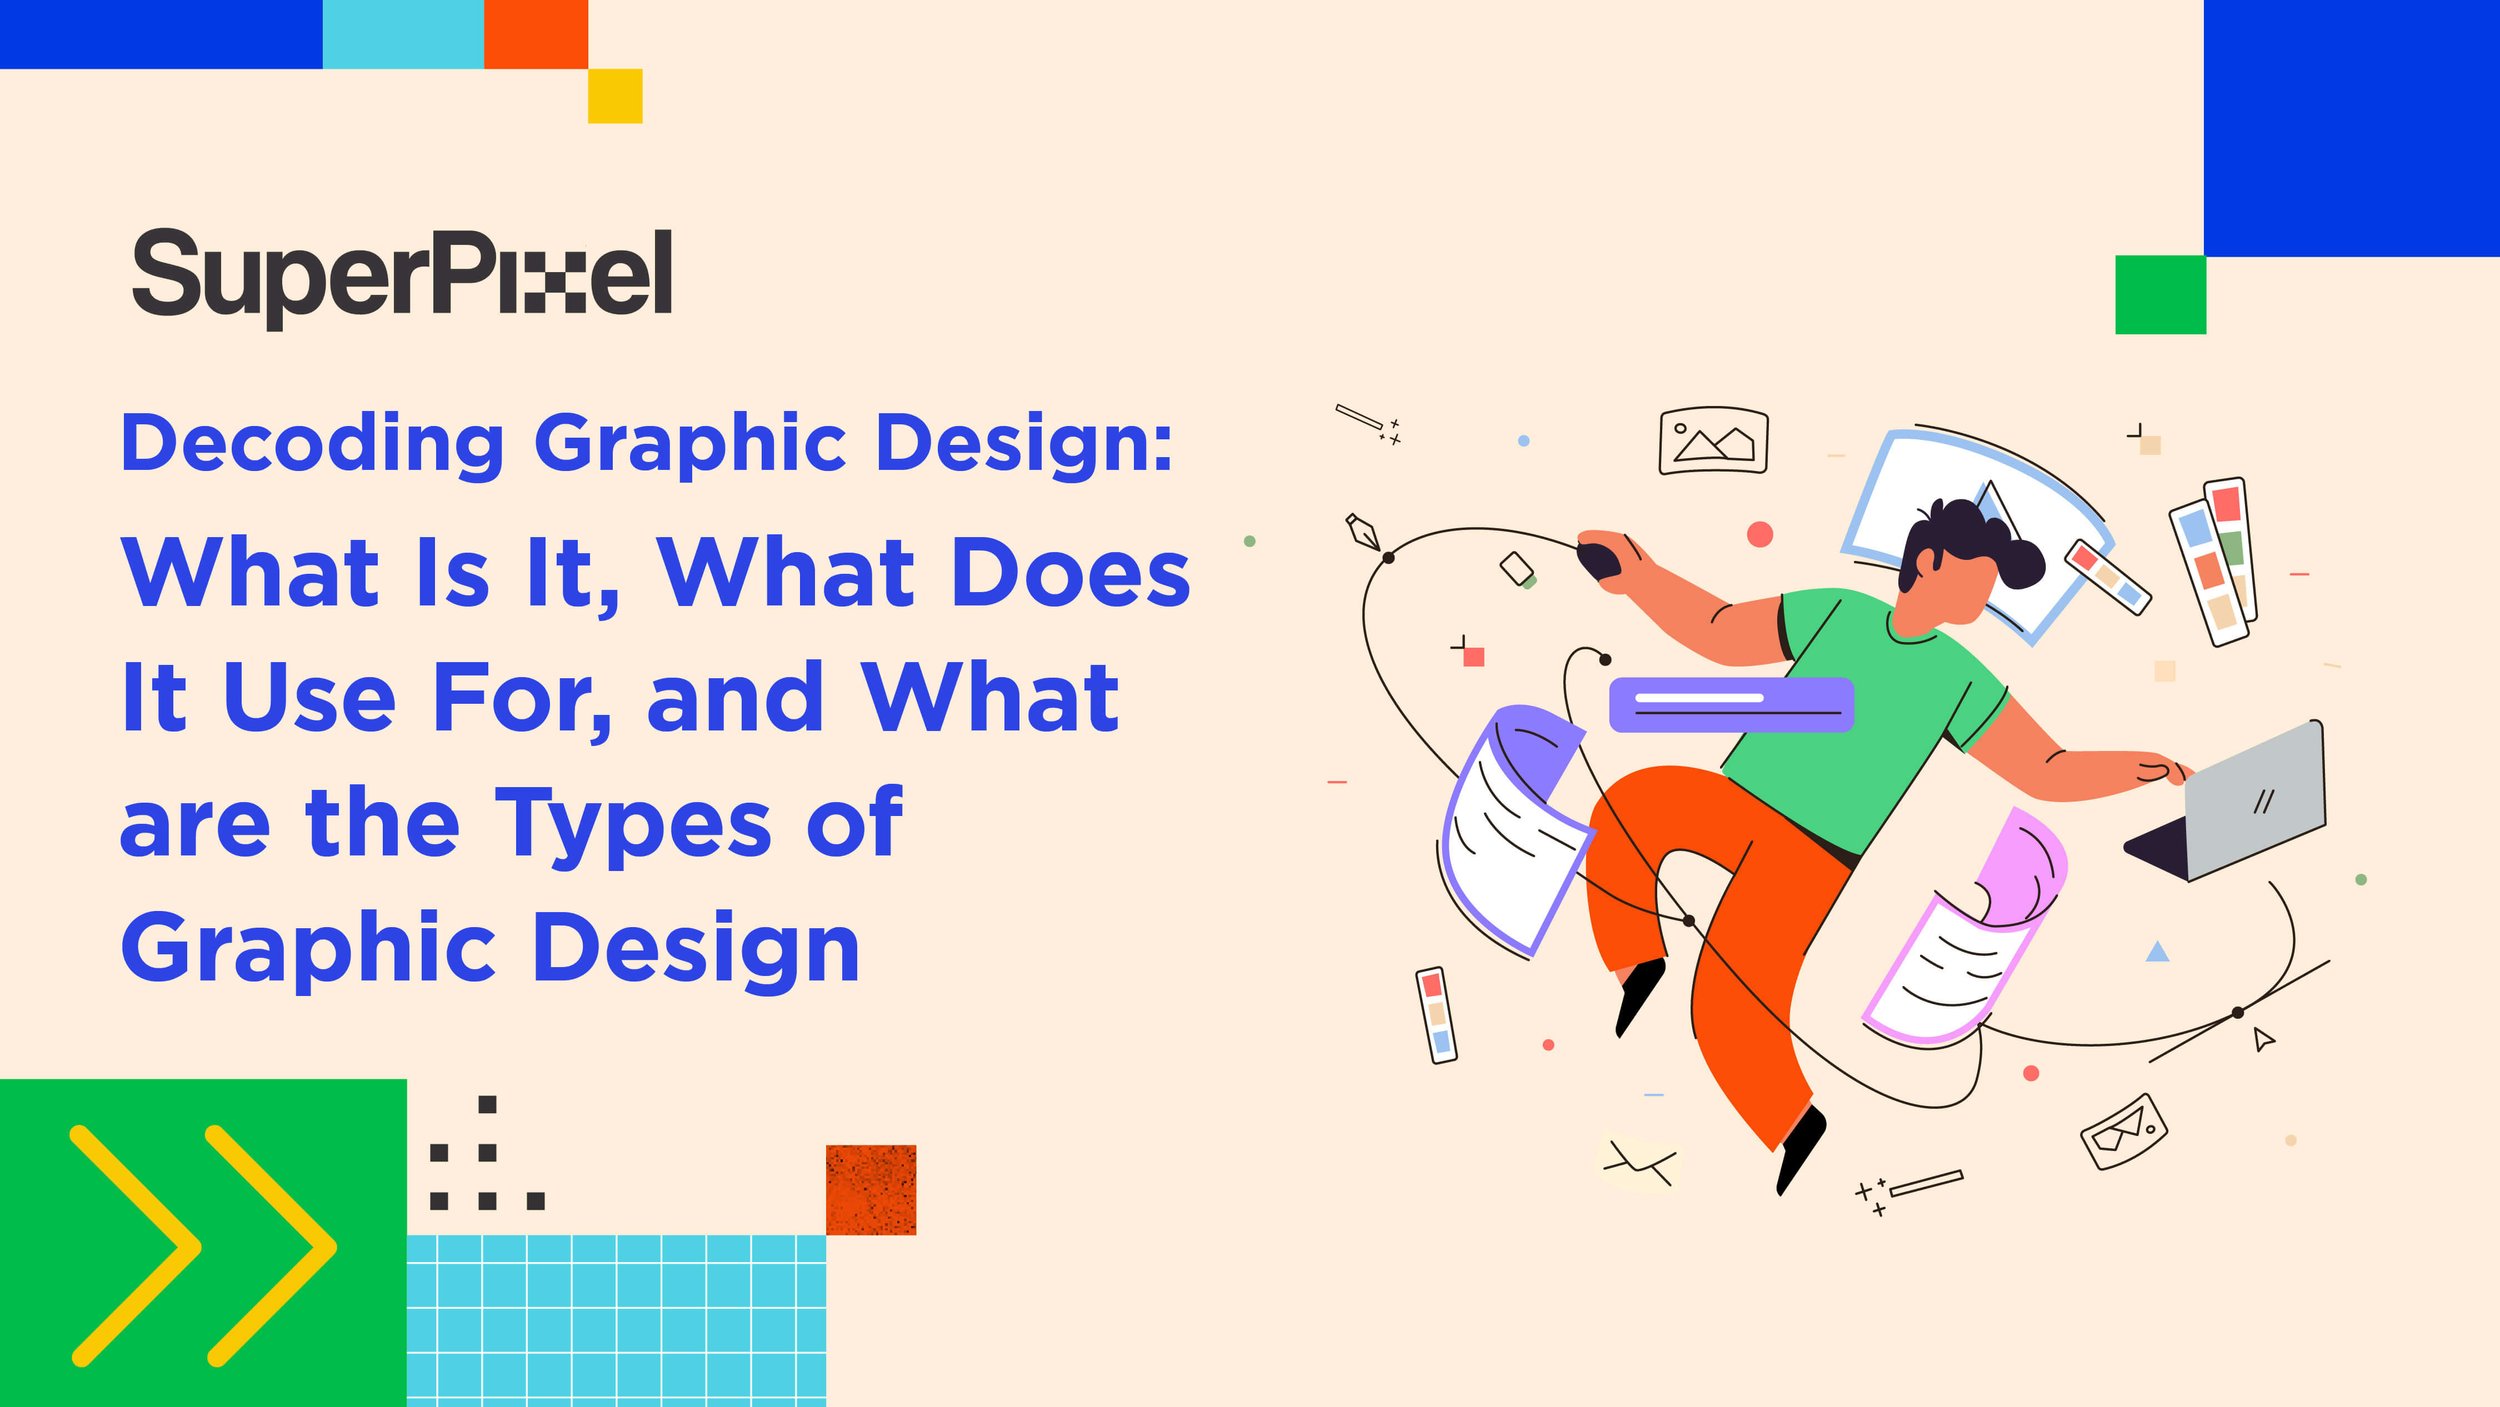 Decoding Graphic Design: the Uses and Types of Graphic Design